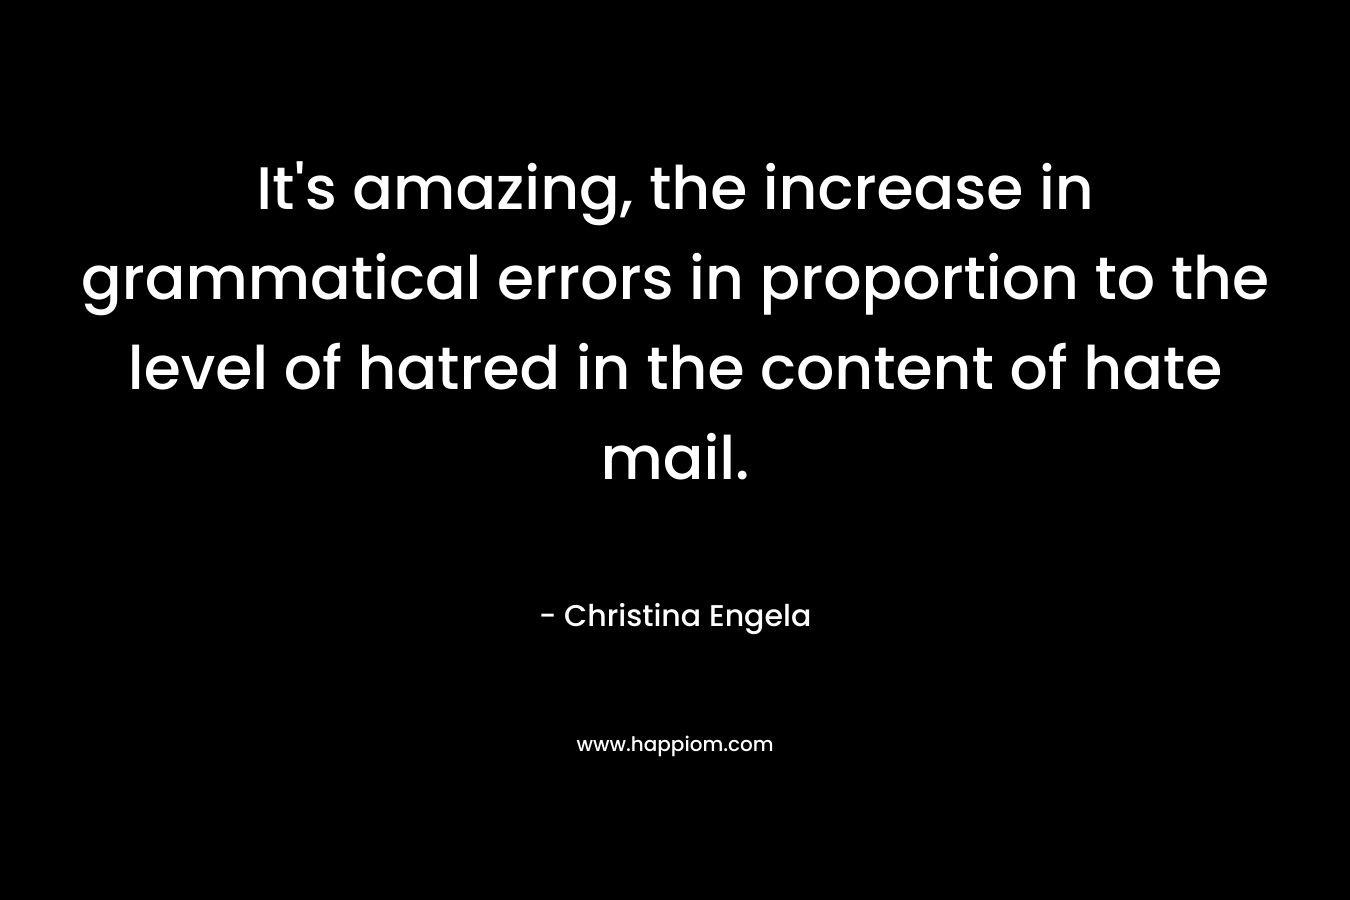 It’s amazing, the increase in grammatical errors in proportion to the level of hatred in the content of hate mail. – Christina Engela